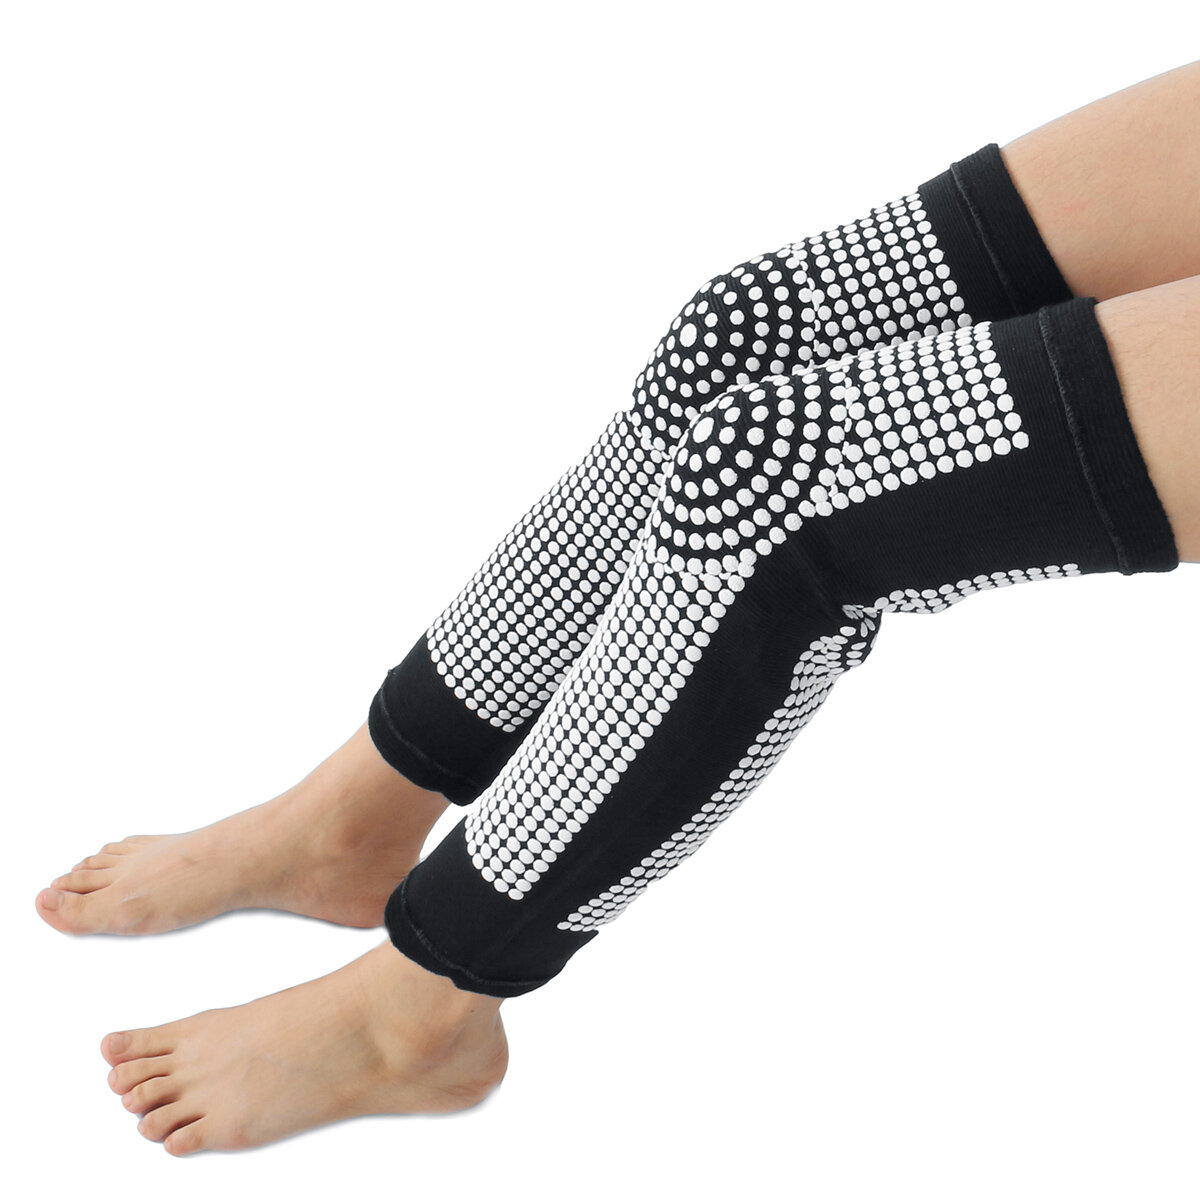 

L/XL/XXL Pair Self Heating Knee Pads Magnetic Therapy Pain Relief Arthritis Brace Tourmaline